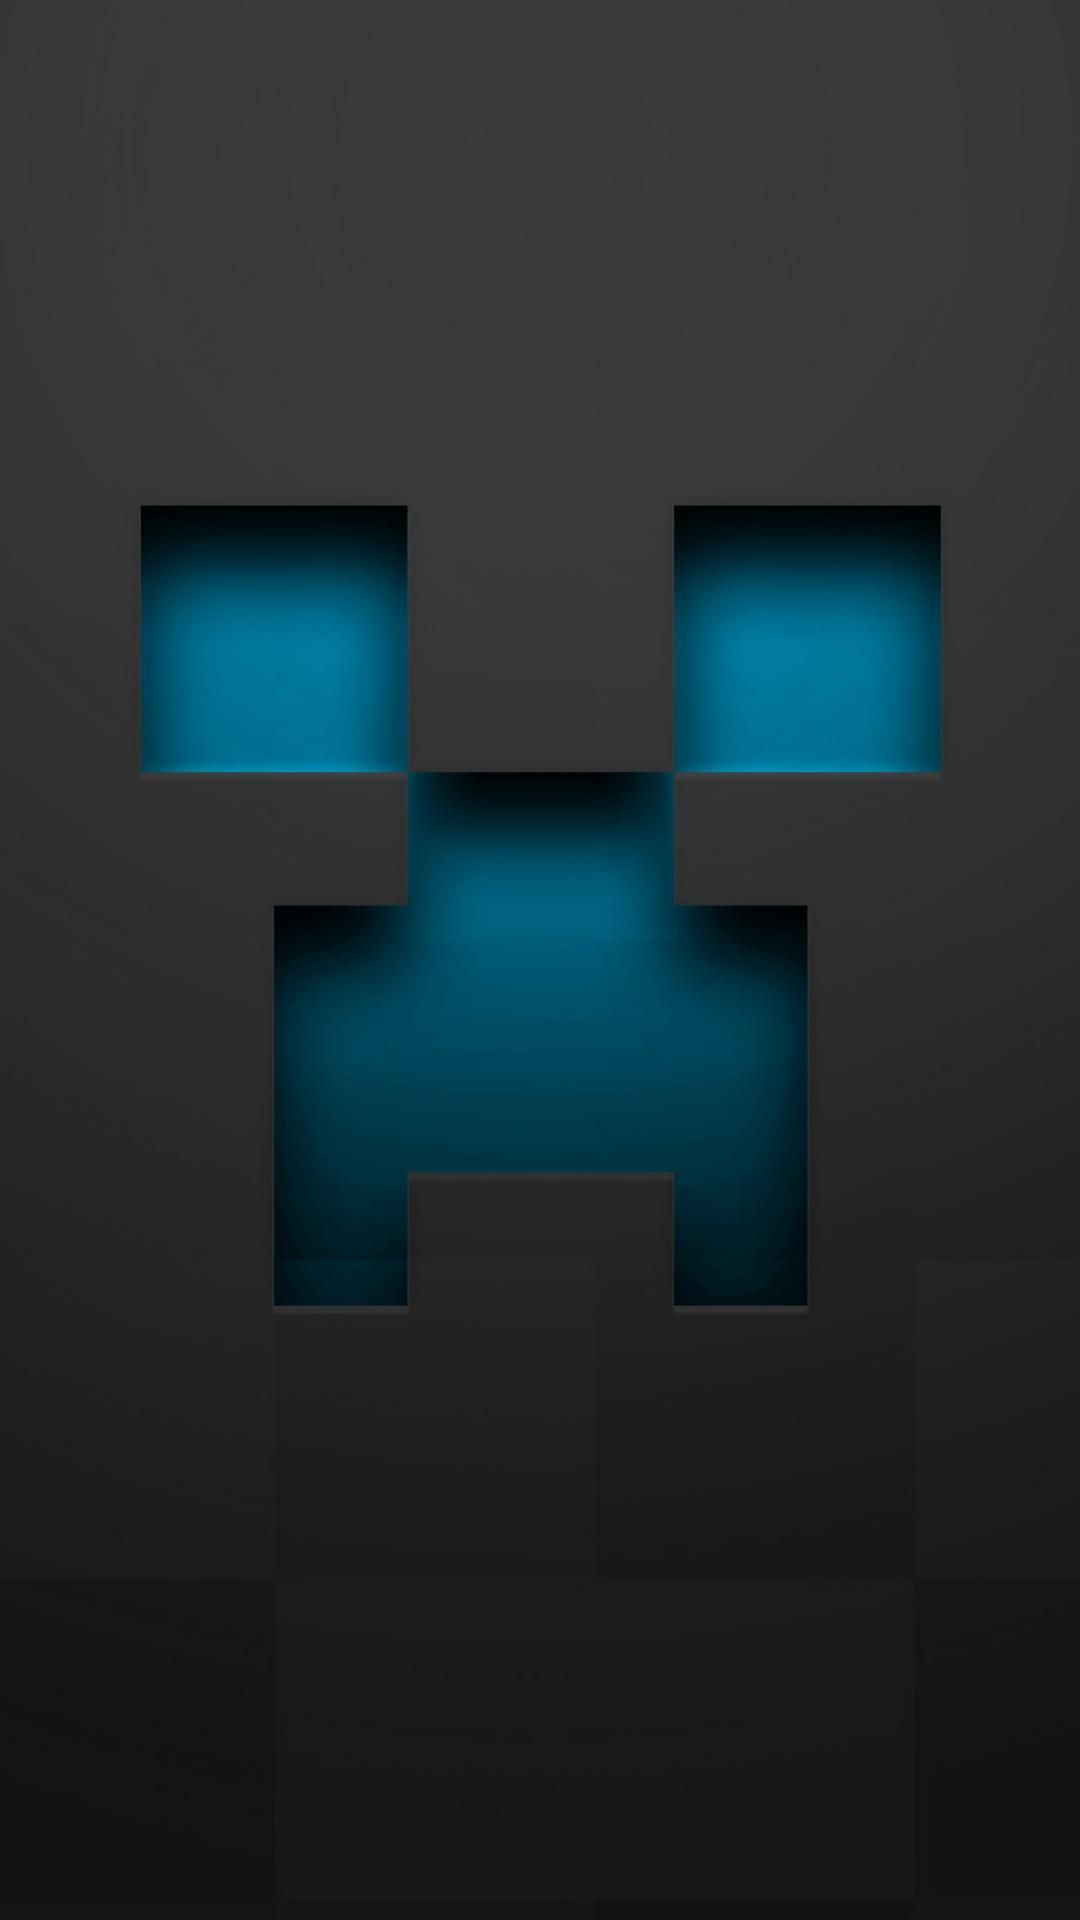 Minecraft iPhone Background. Awesome Minecraft Wallpaper, Minecraft Skeleton Wallpaper and Girly Minecraft Wallpaper